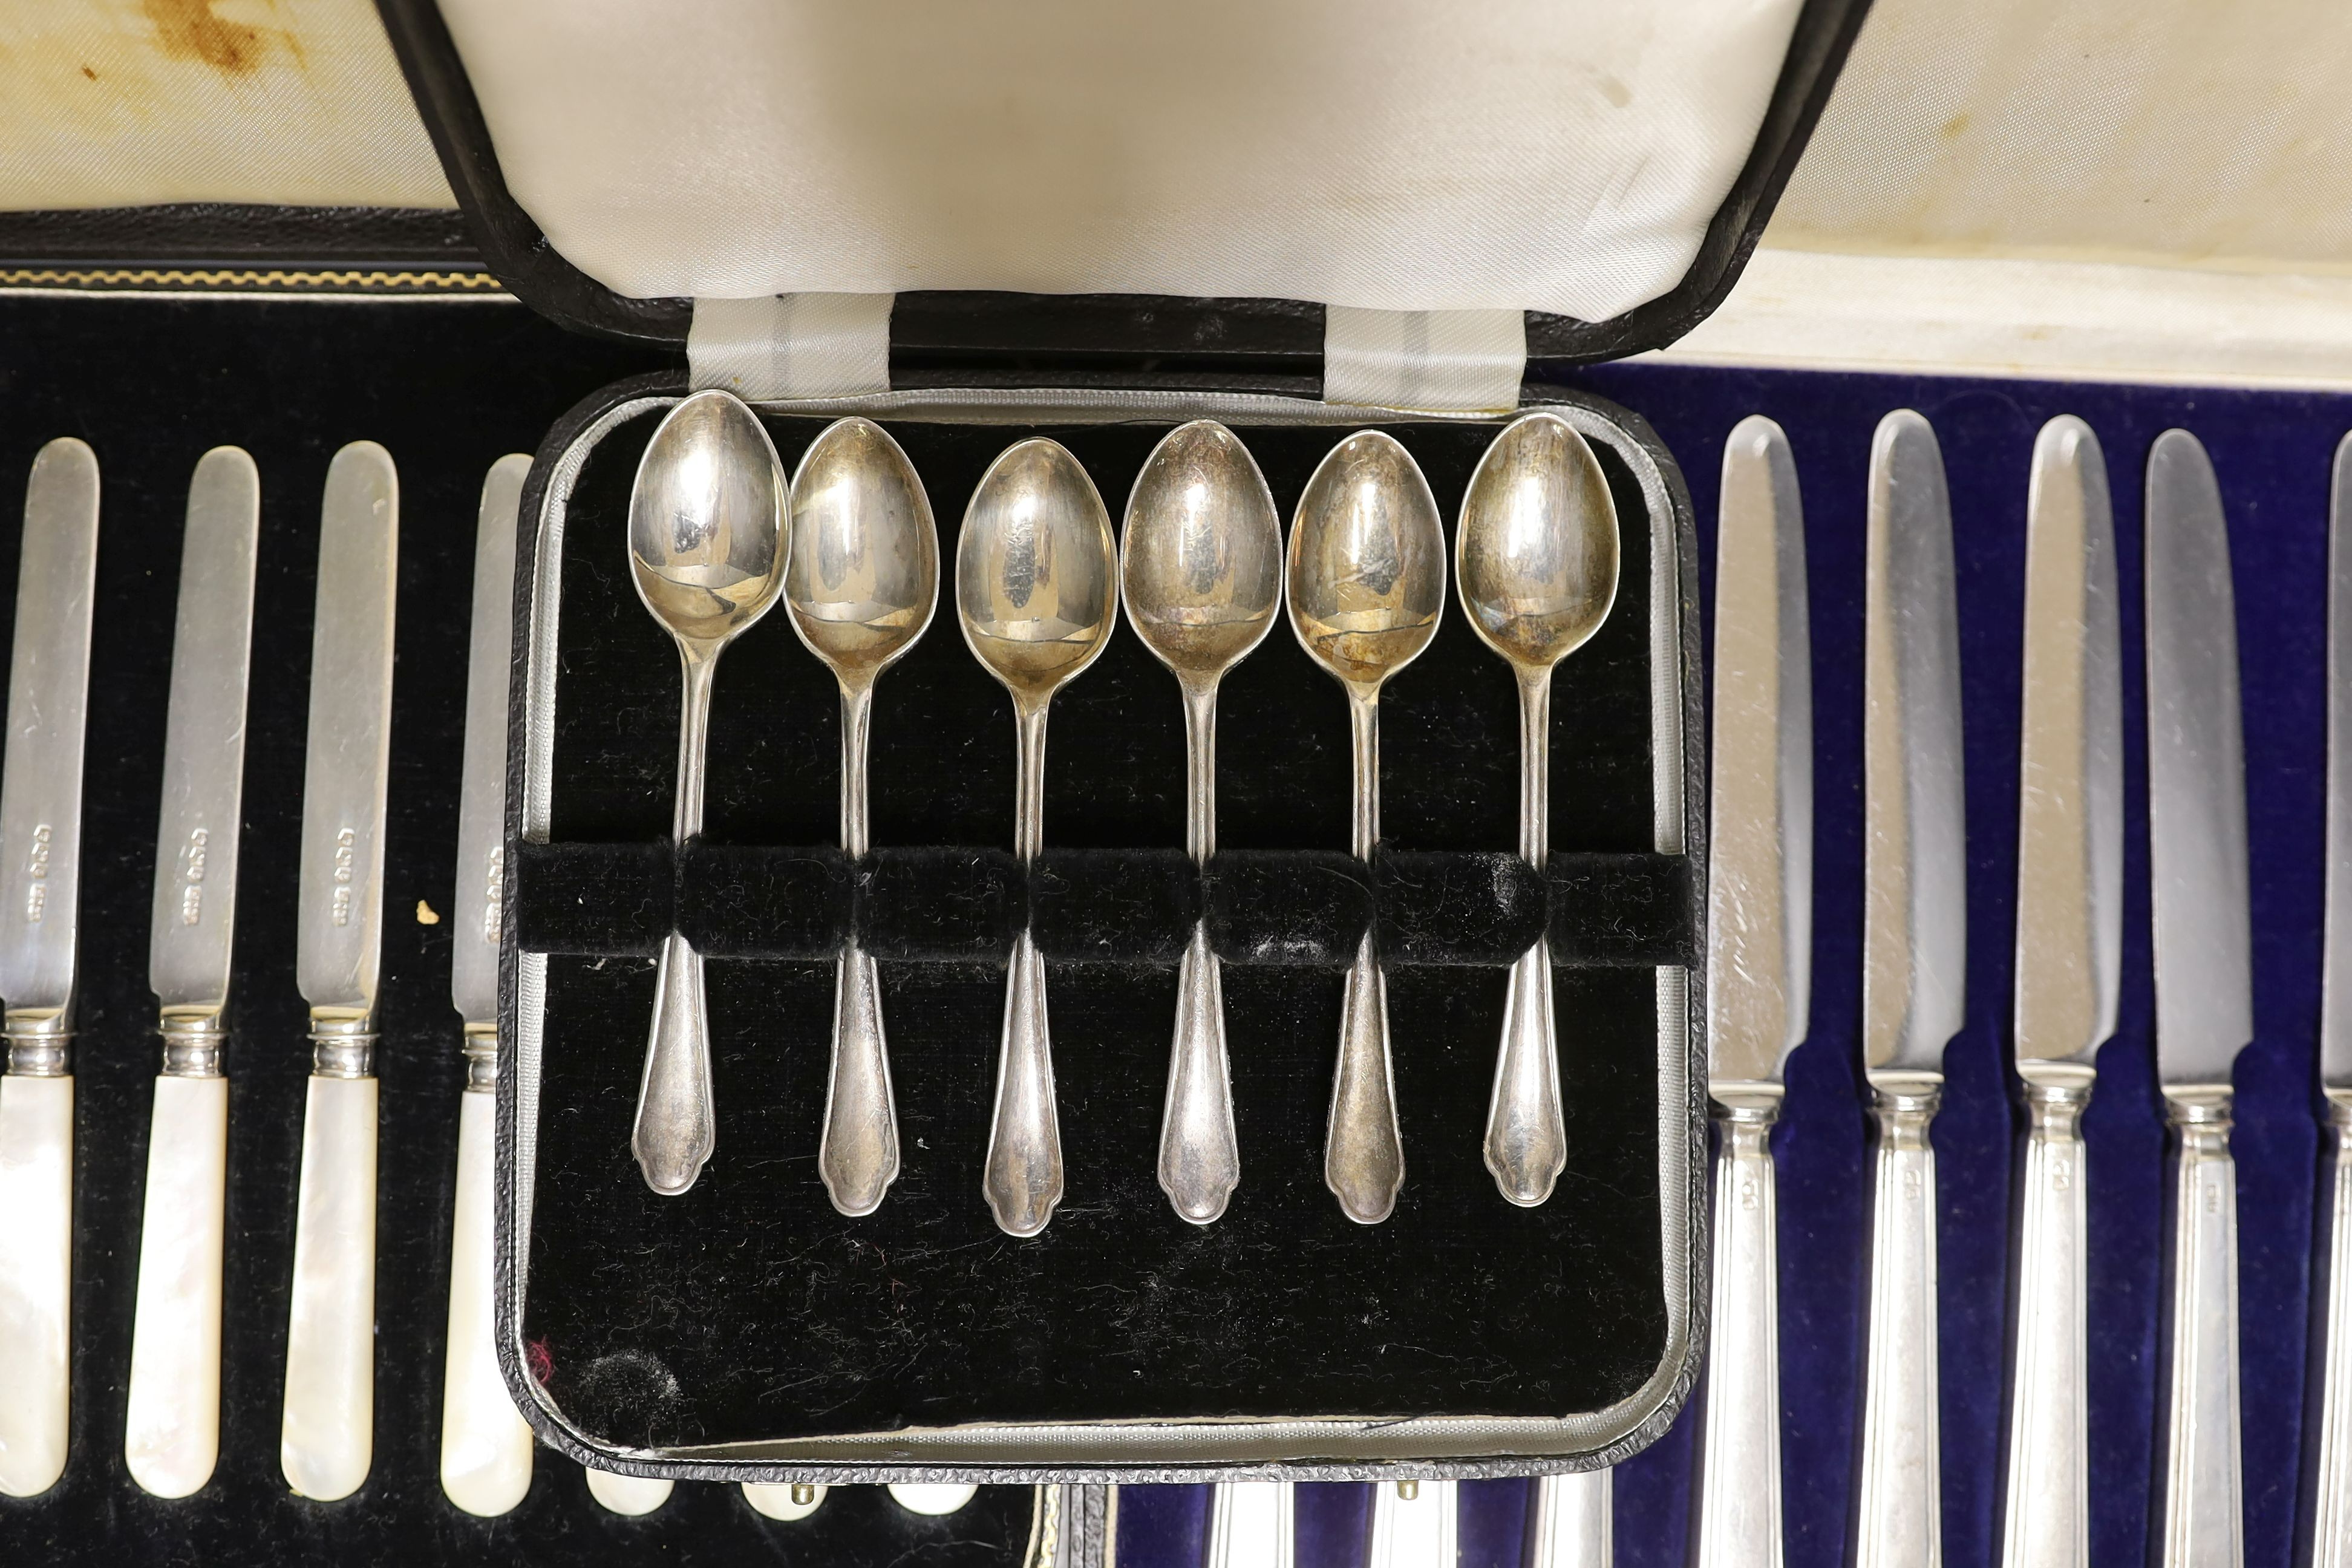 Two cased sets of silver or mother of pearl handled tea knives and a cased set of six silver teaspoons.